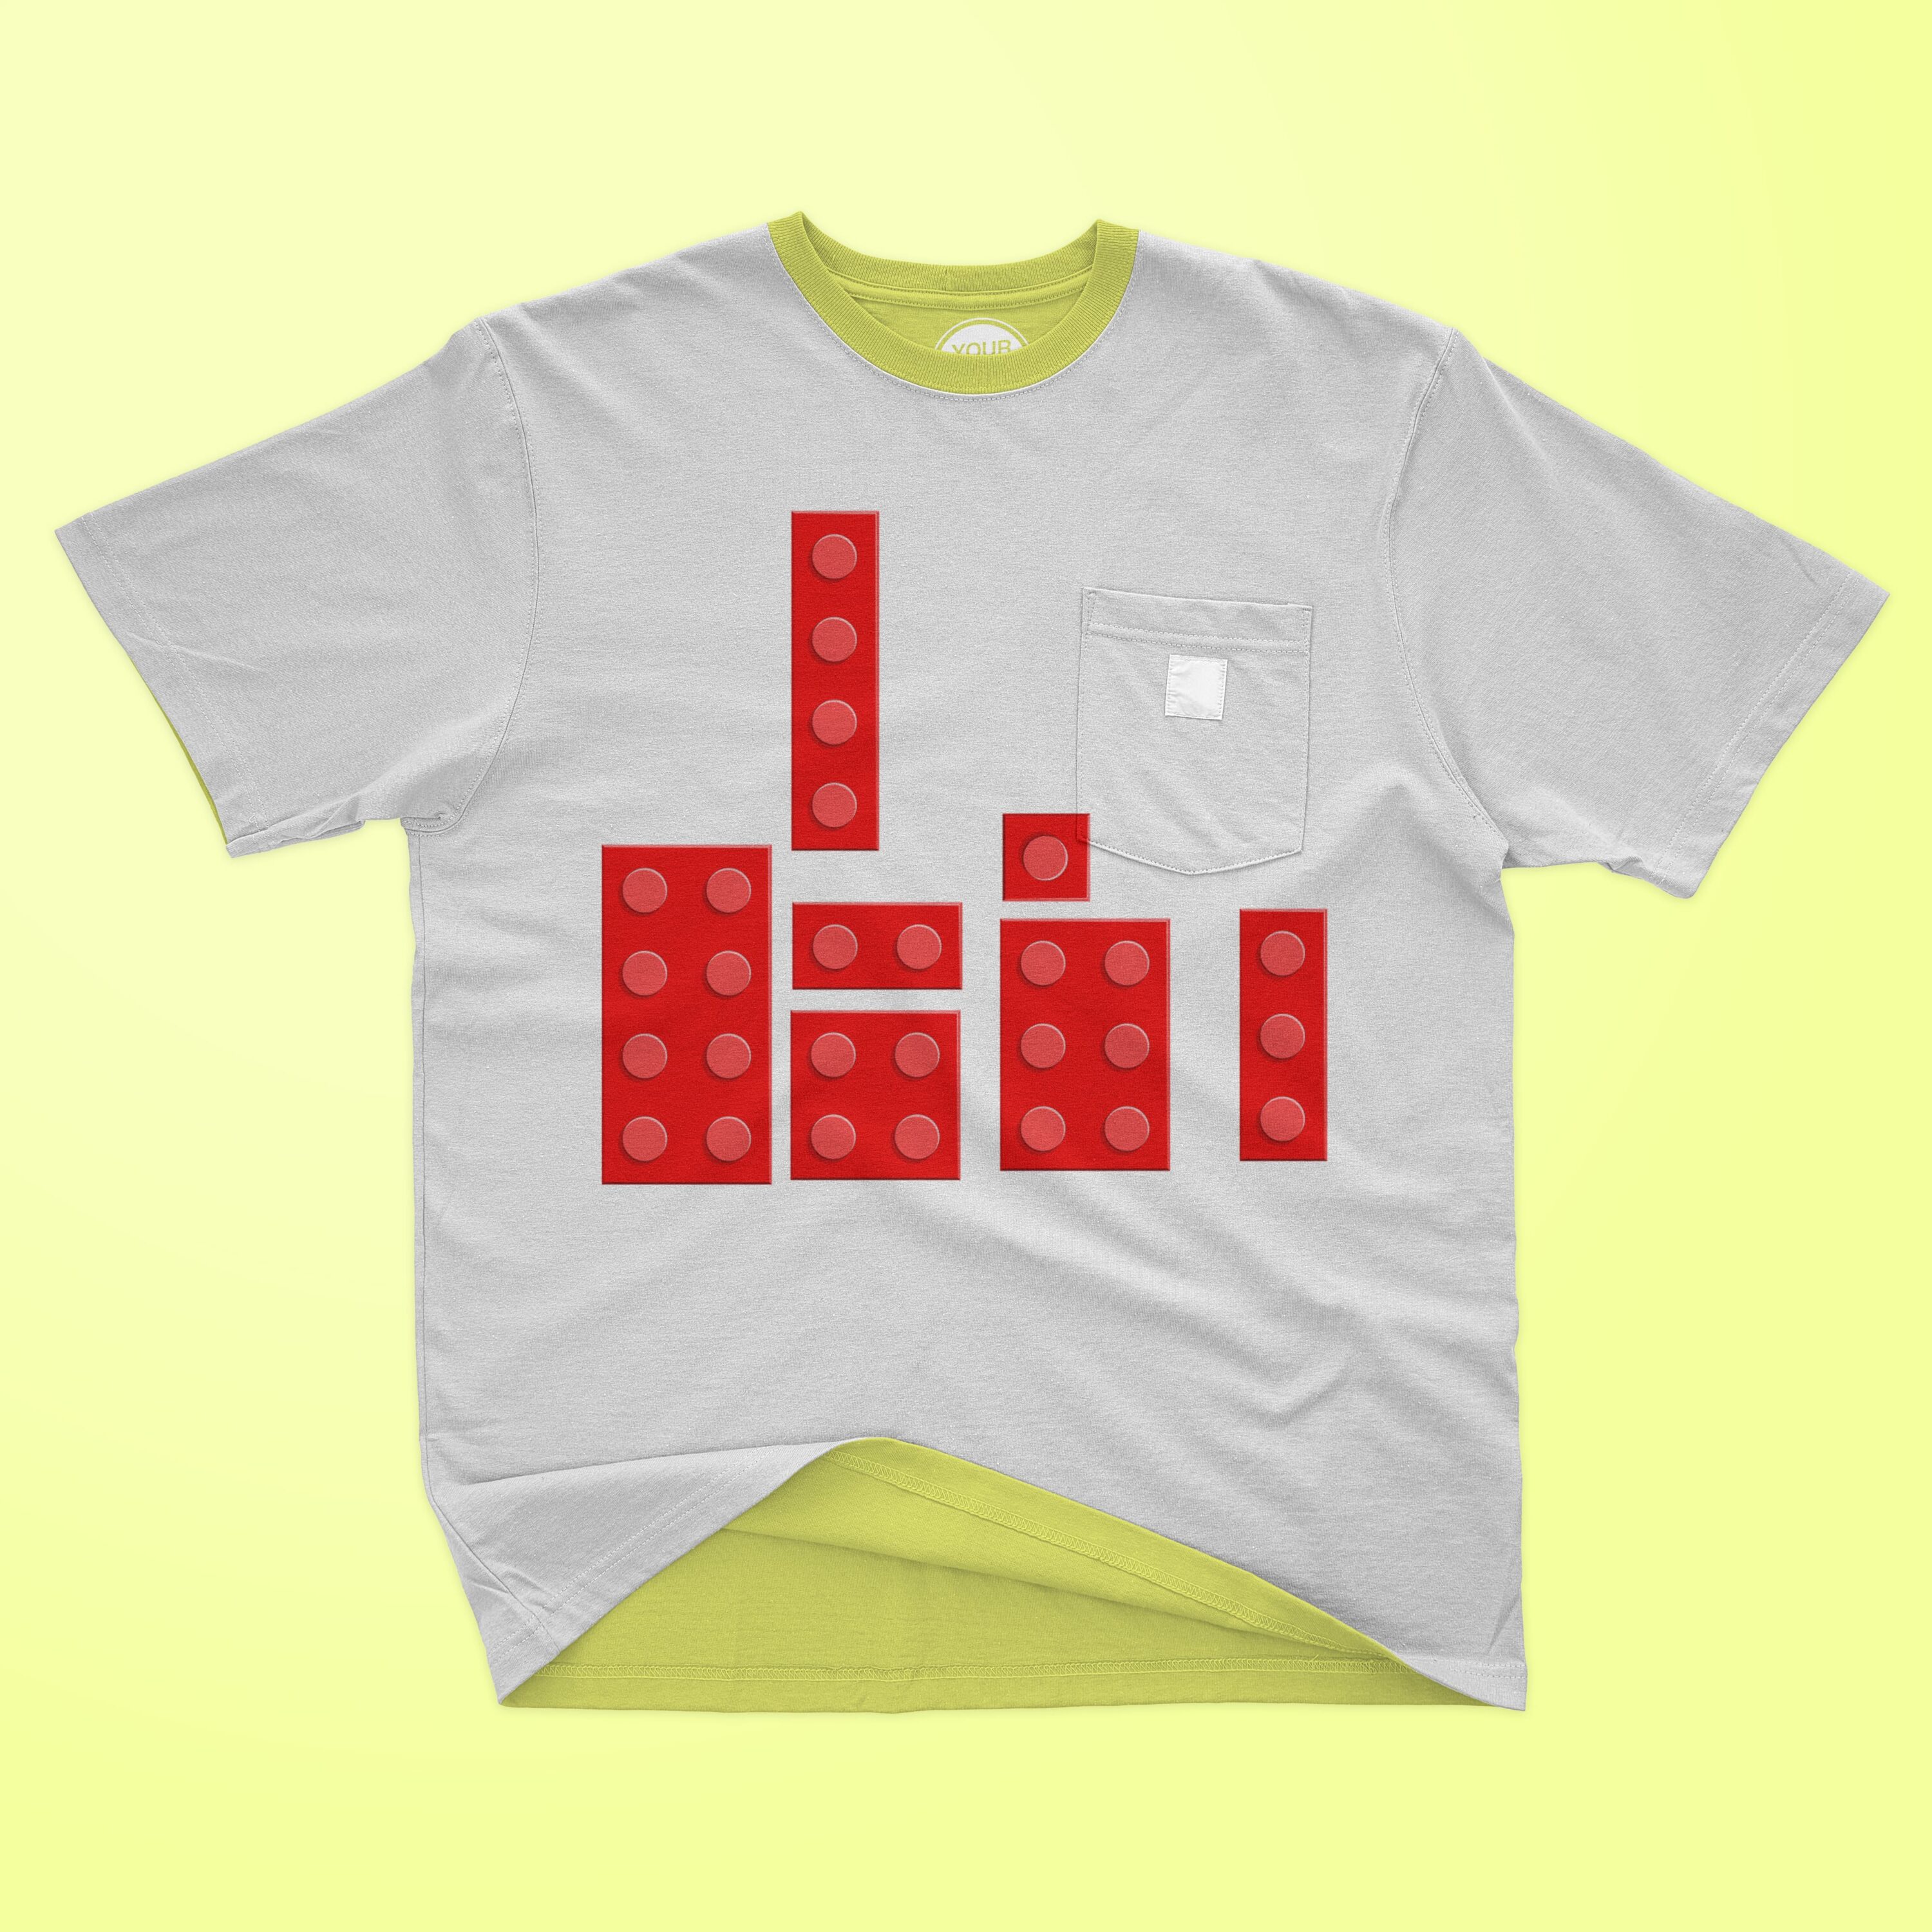 Red lego bricks printed on the t-shirt.